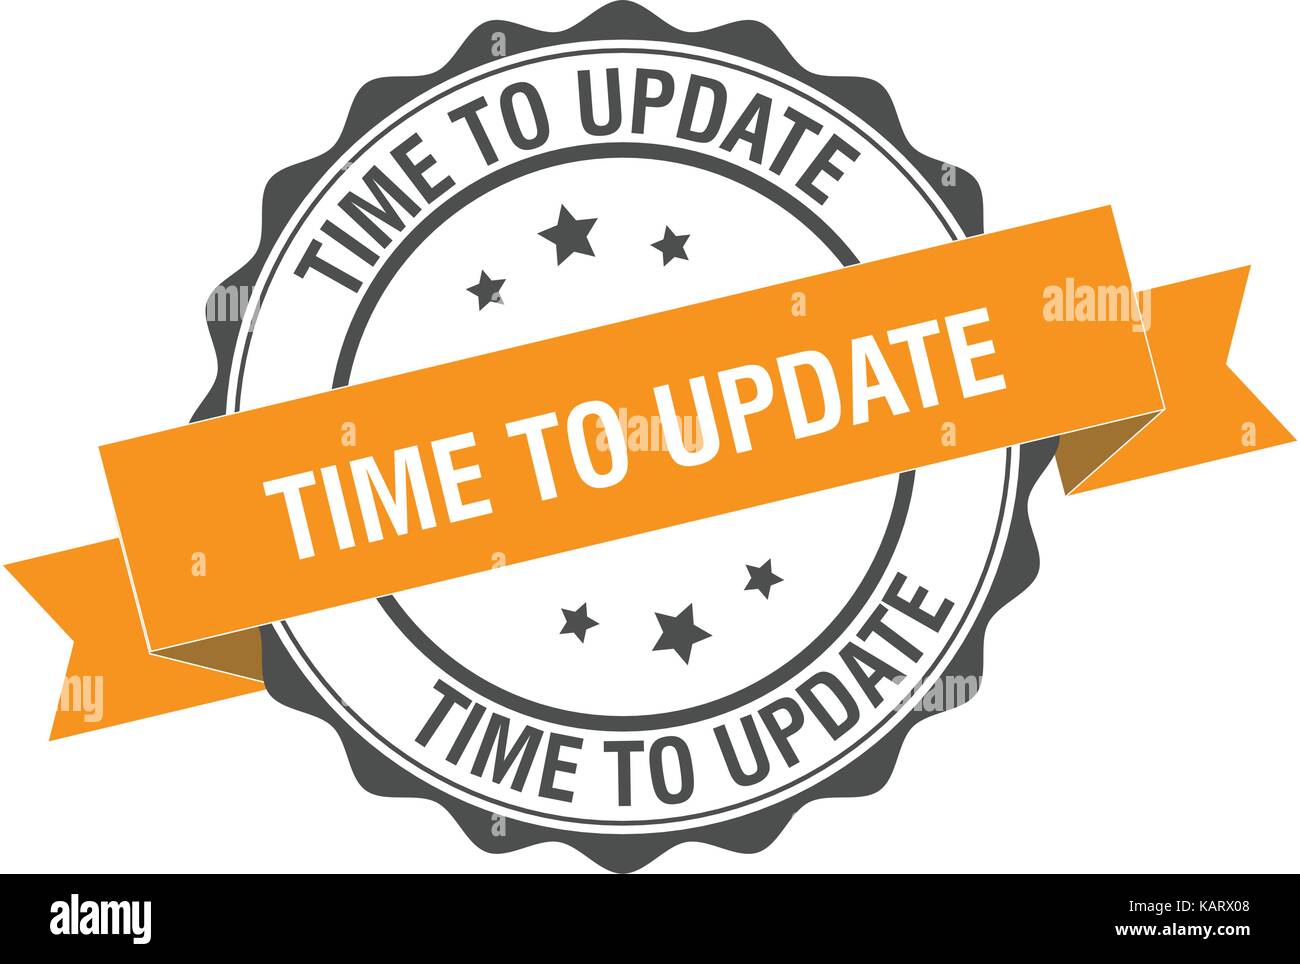 Time to update stamp illustration Stock Vector